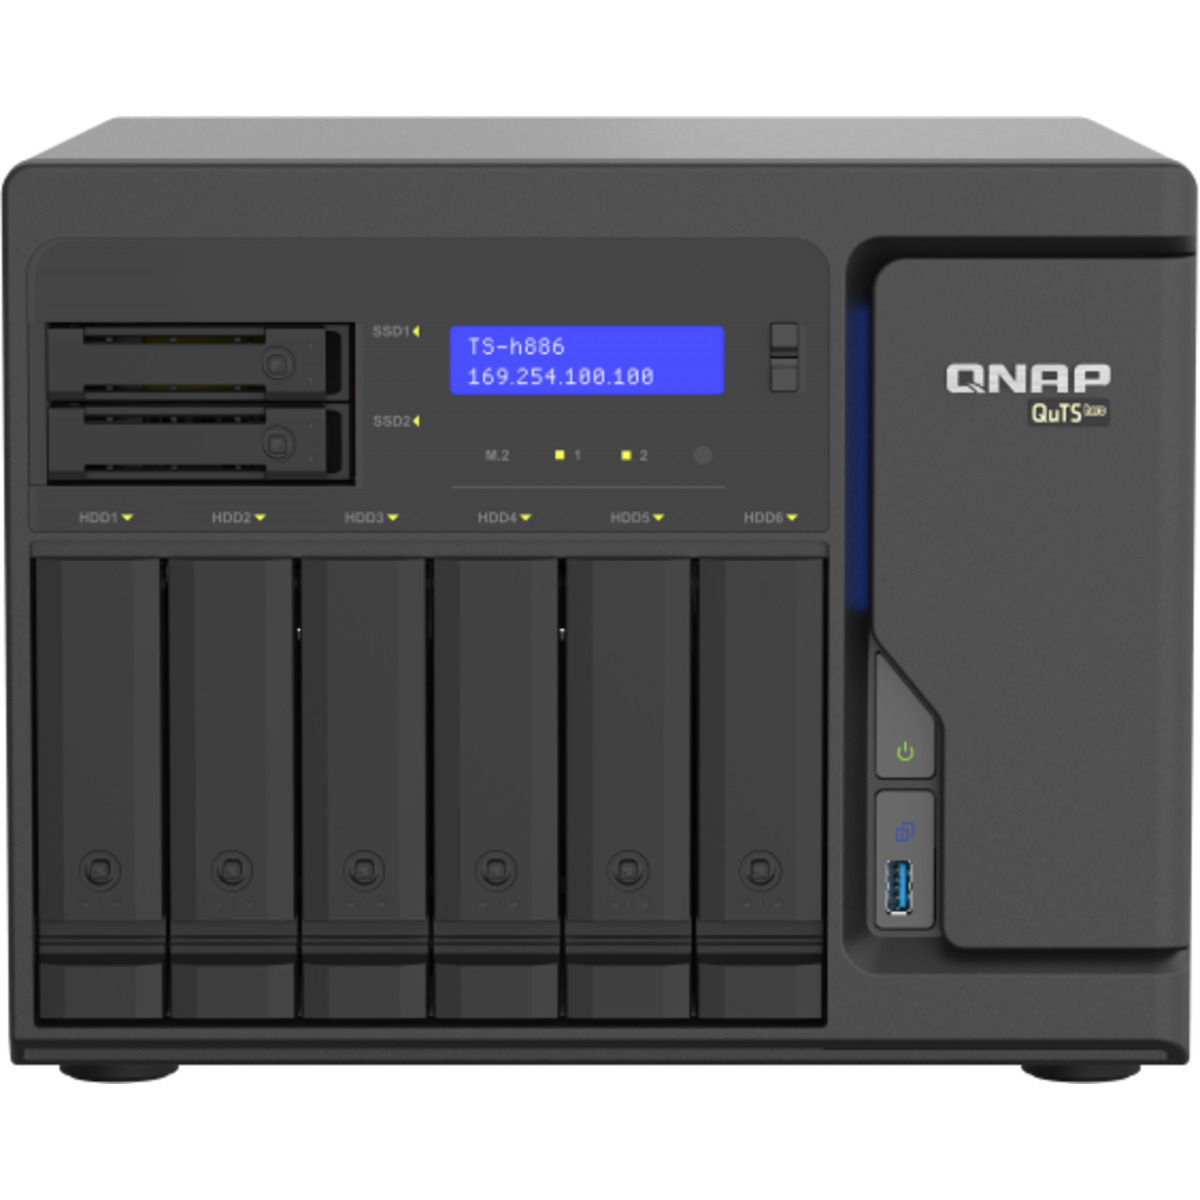 QNAP TS-h886 QuTS hero NAS 18tb 6+2-Bay Desktop Large Business / Enterprise NAS - Network Attached Storage Device 3x6tb Seagate BarraCuda ST6000DM003 3.5 5400rpm SATA 6Gb/s HDD CONSUMER Class Drives Installed - Burn-In Tested TS-h886 QuTS hero NAS